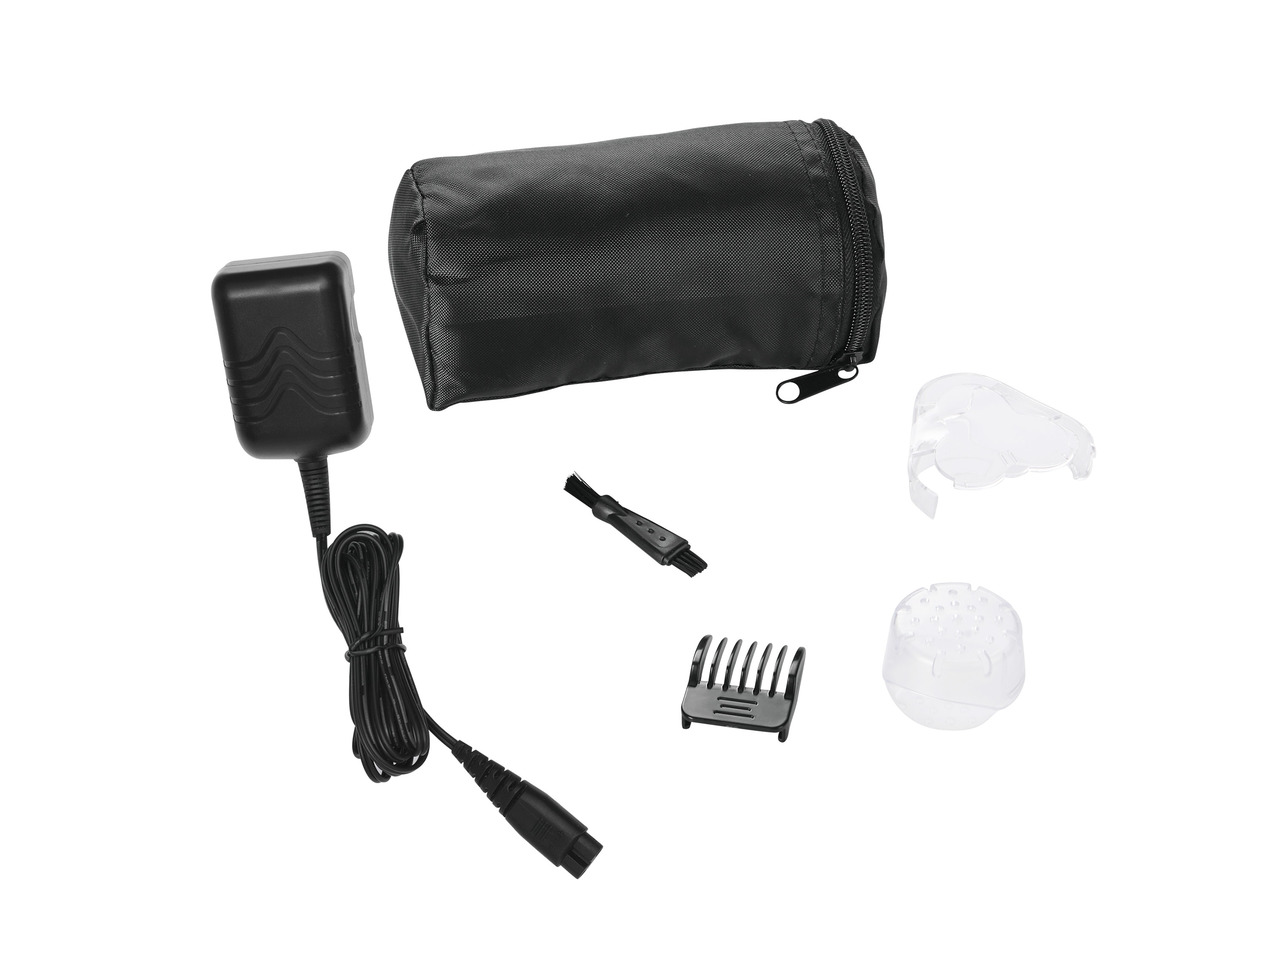 Silvercrest 3-in-1 Rotary Shaver1